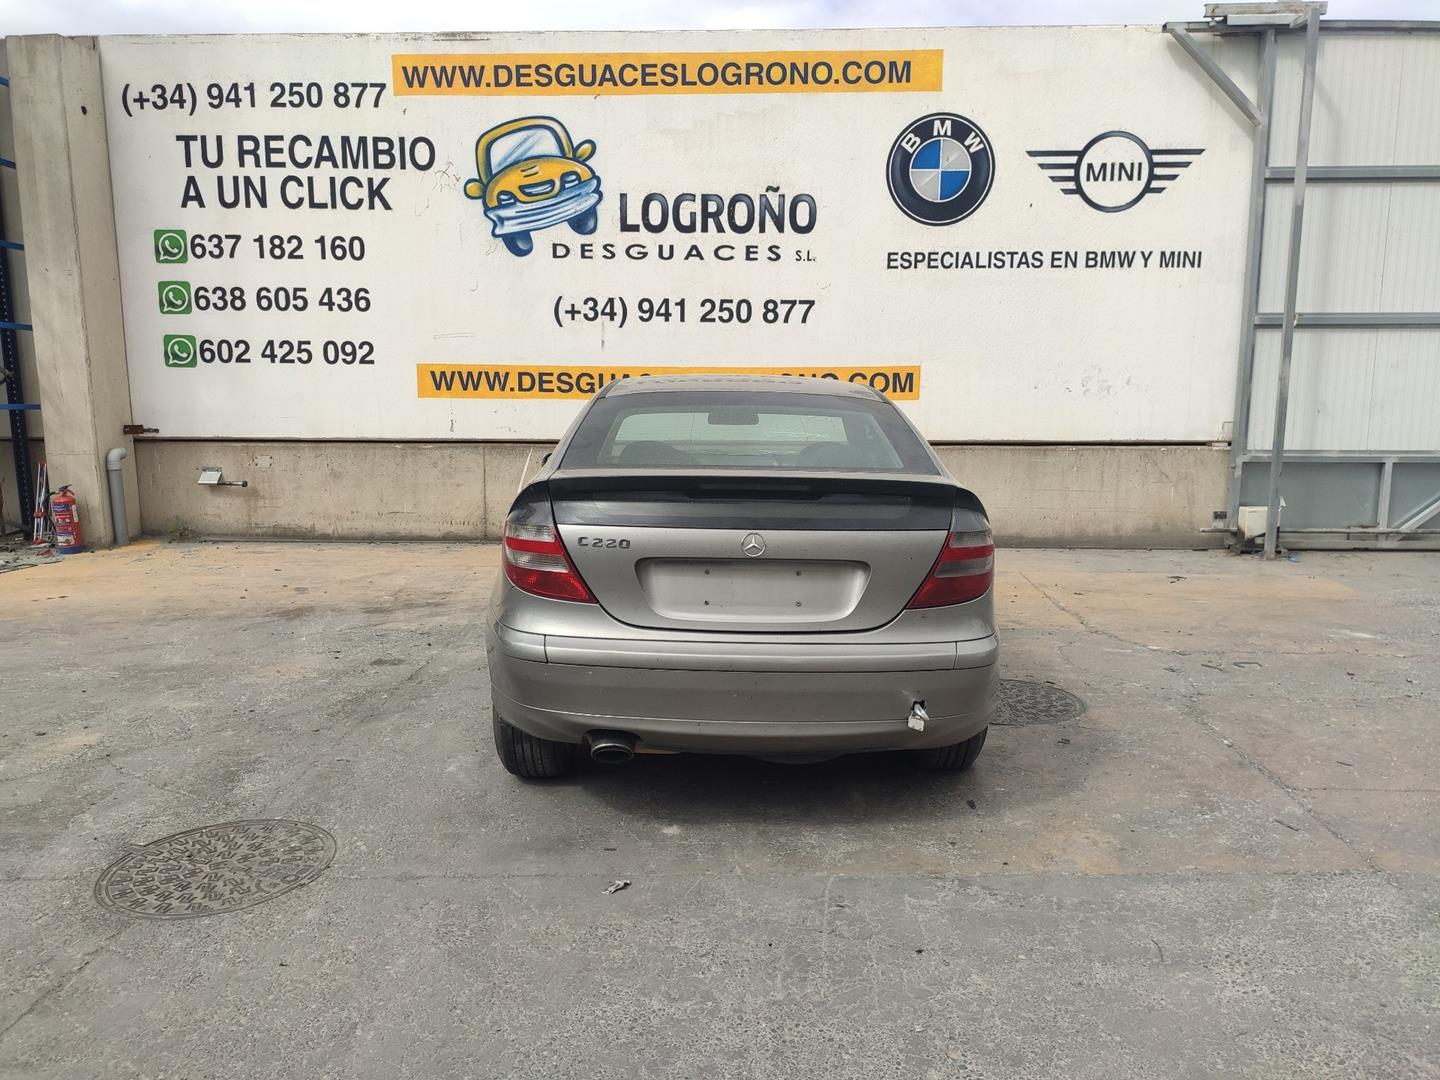 MERCEDES-BENZ C-Class W203/S203/CL203 (2000-2008) Other Body Parts A2036900540, A2036900540 20441214